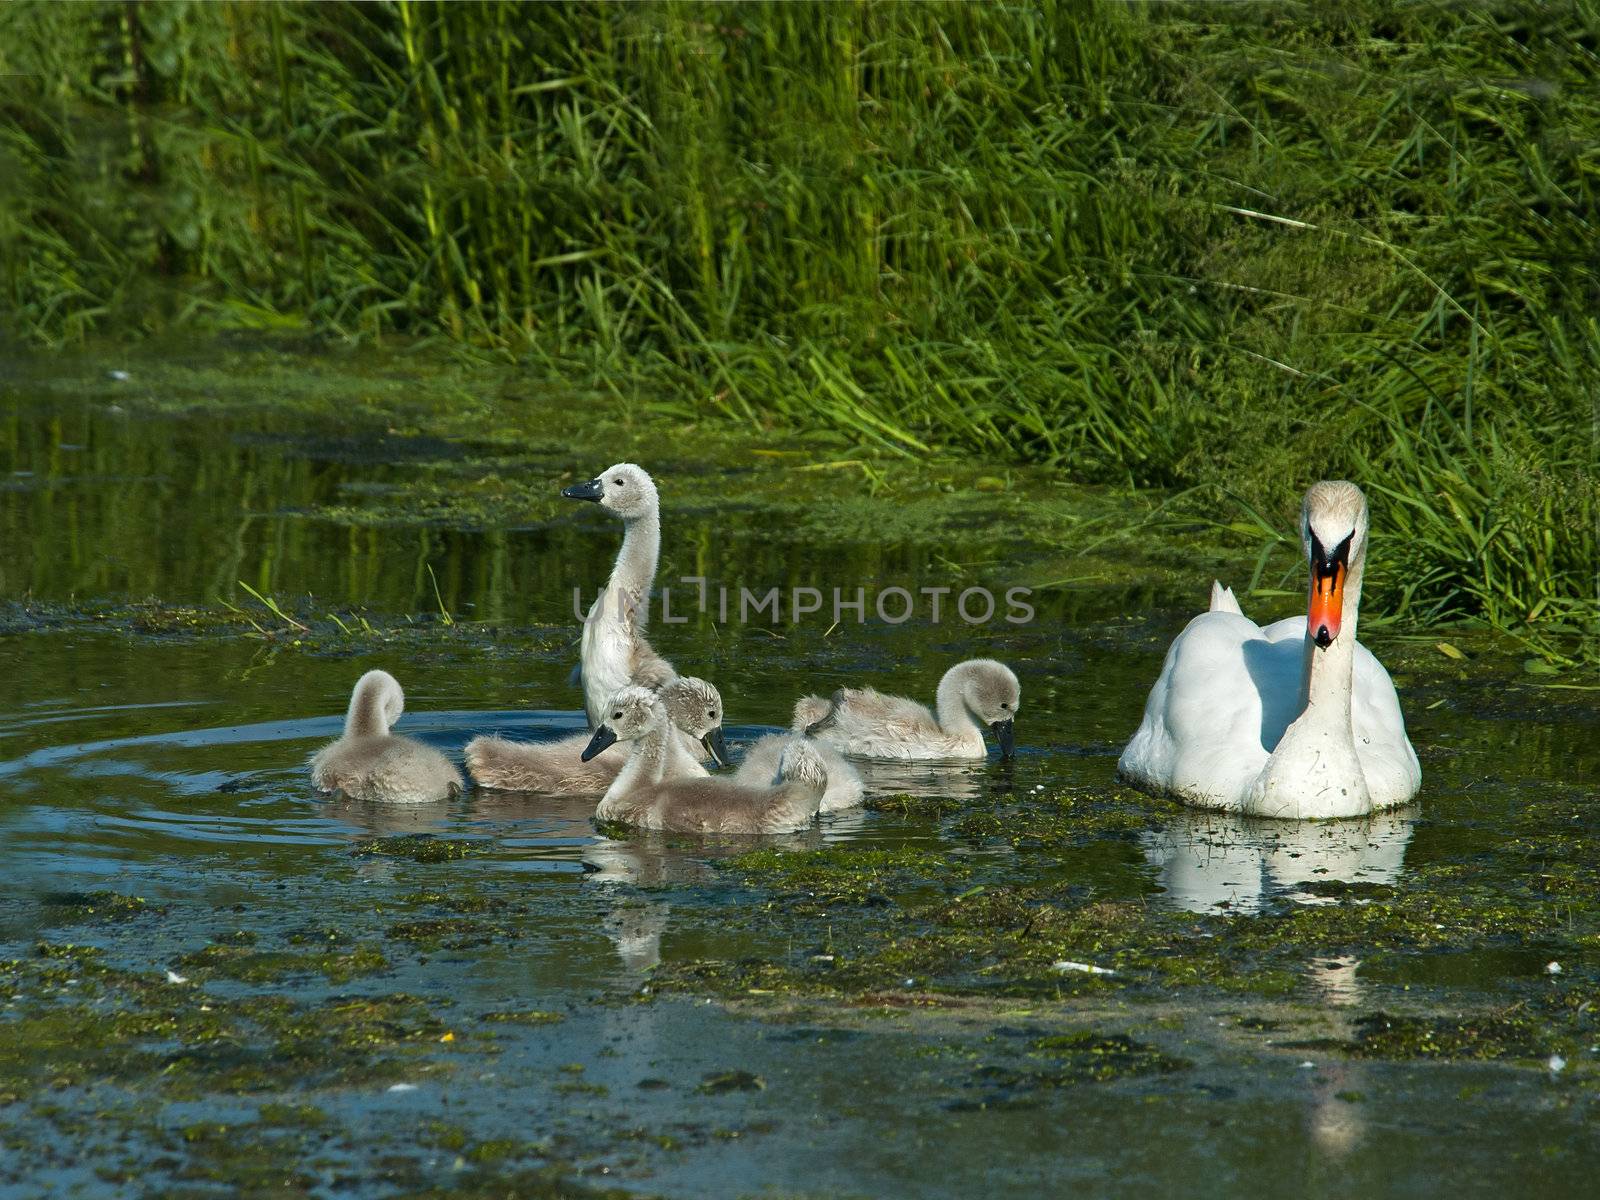 Female Mute Swan and Cygnets in summer sun